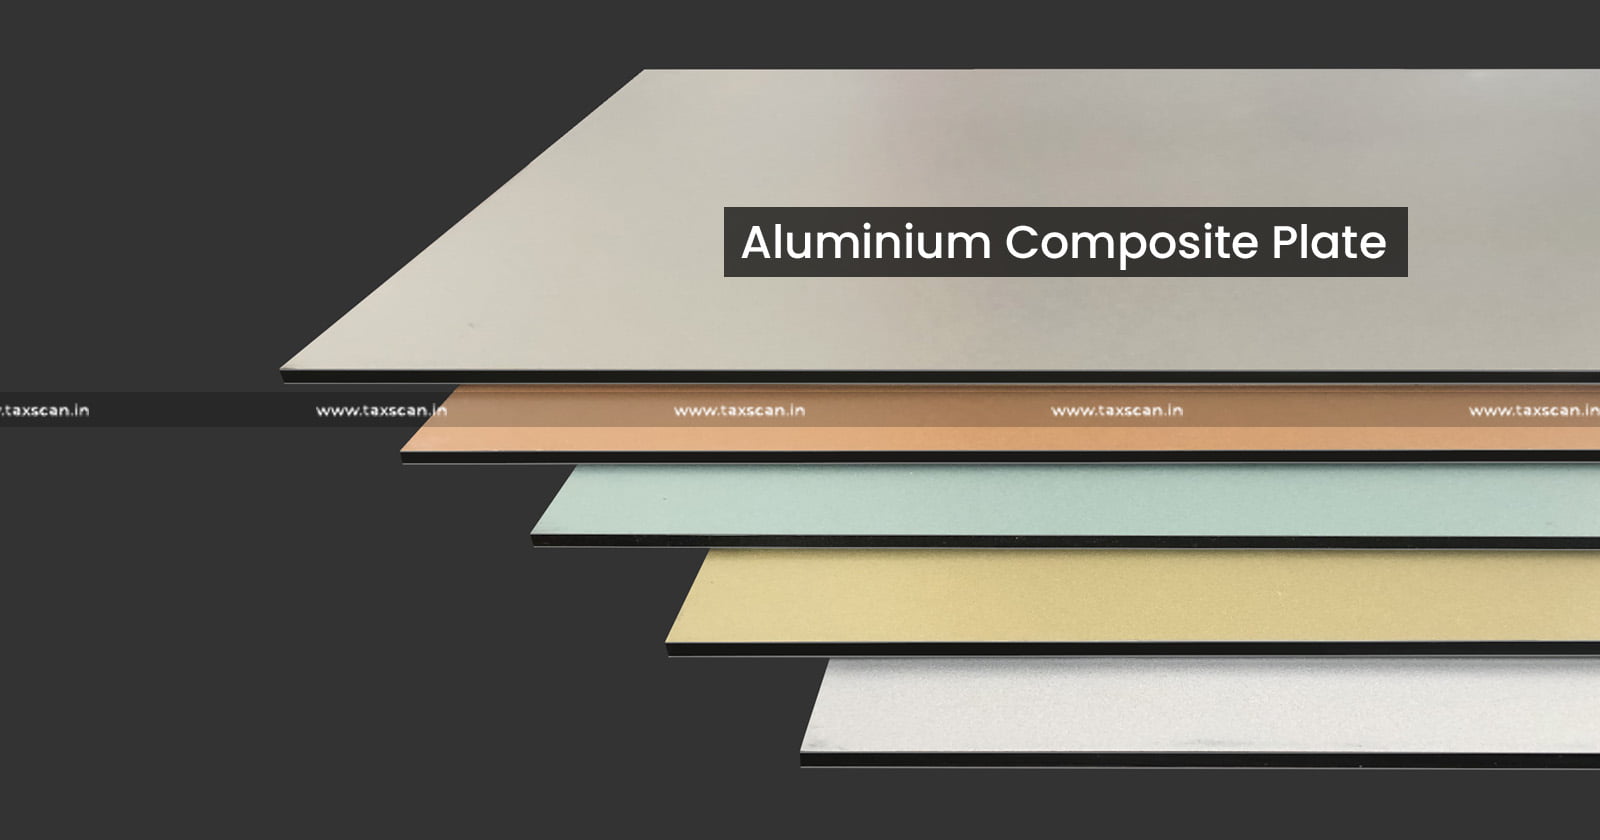 Imported Aluminium Composite Plate is not 'prepared for use in ...